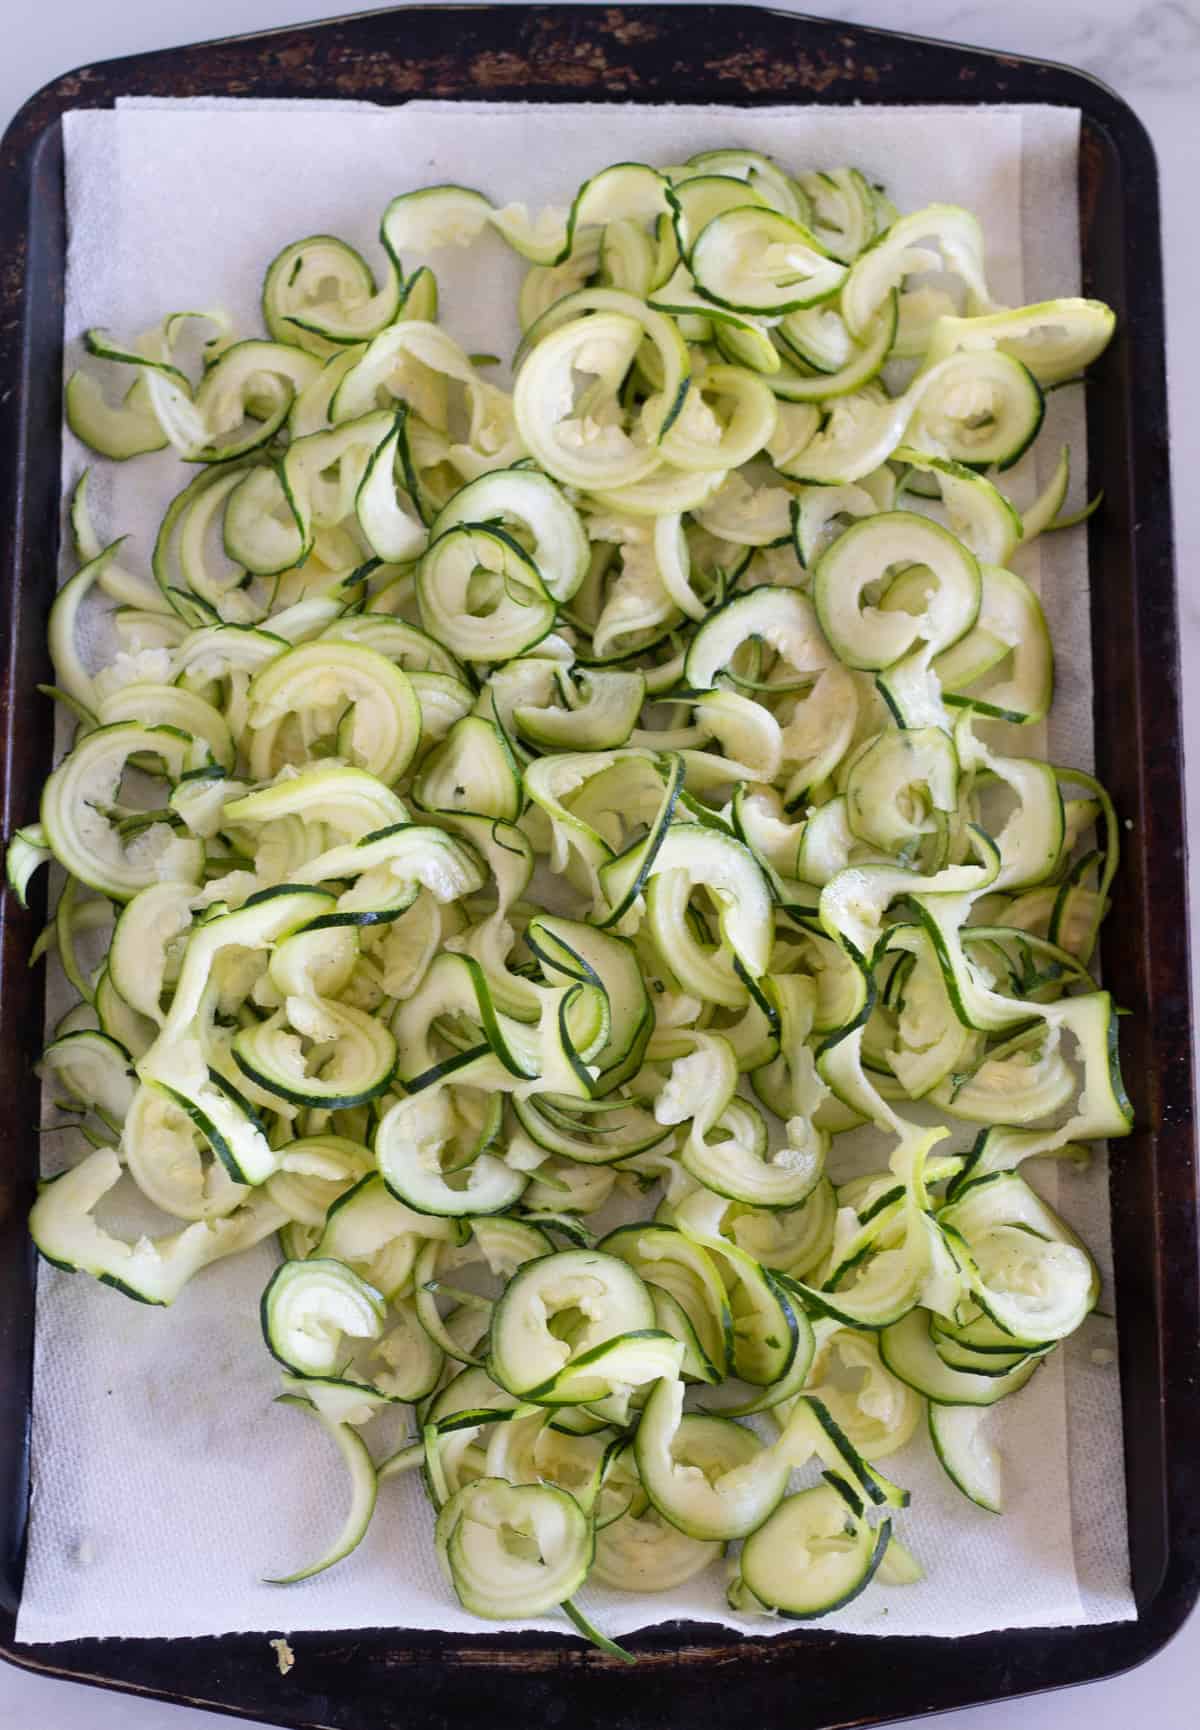 zucchini noodles on paper-towel-lined baking sheet